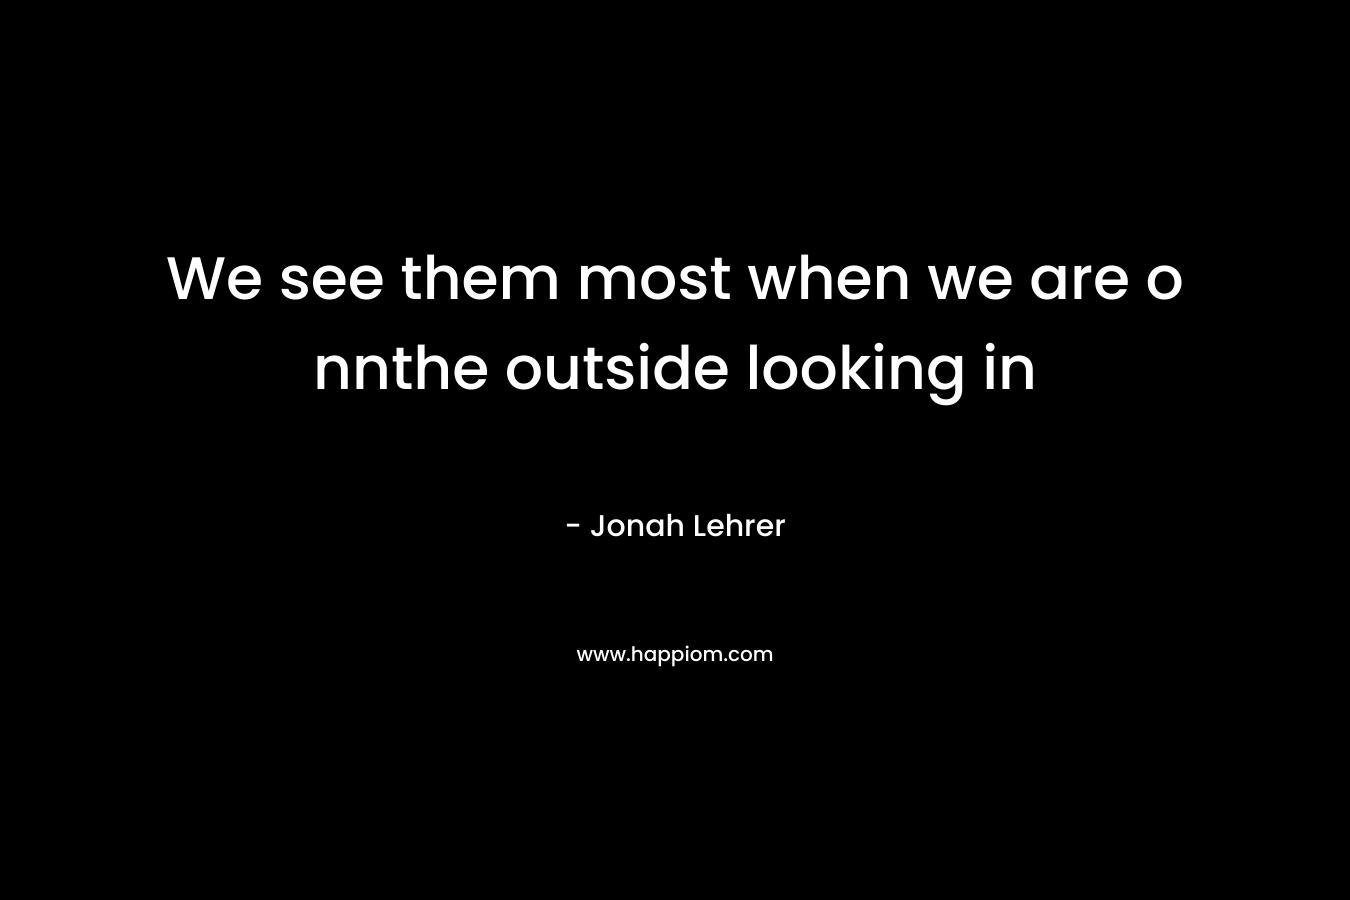 We see them most when we are o nnthe outside looking in – Jonah Lehrer